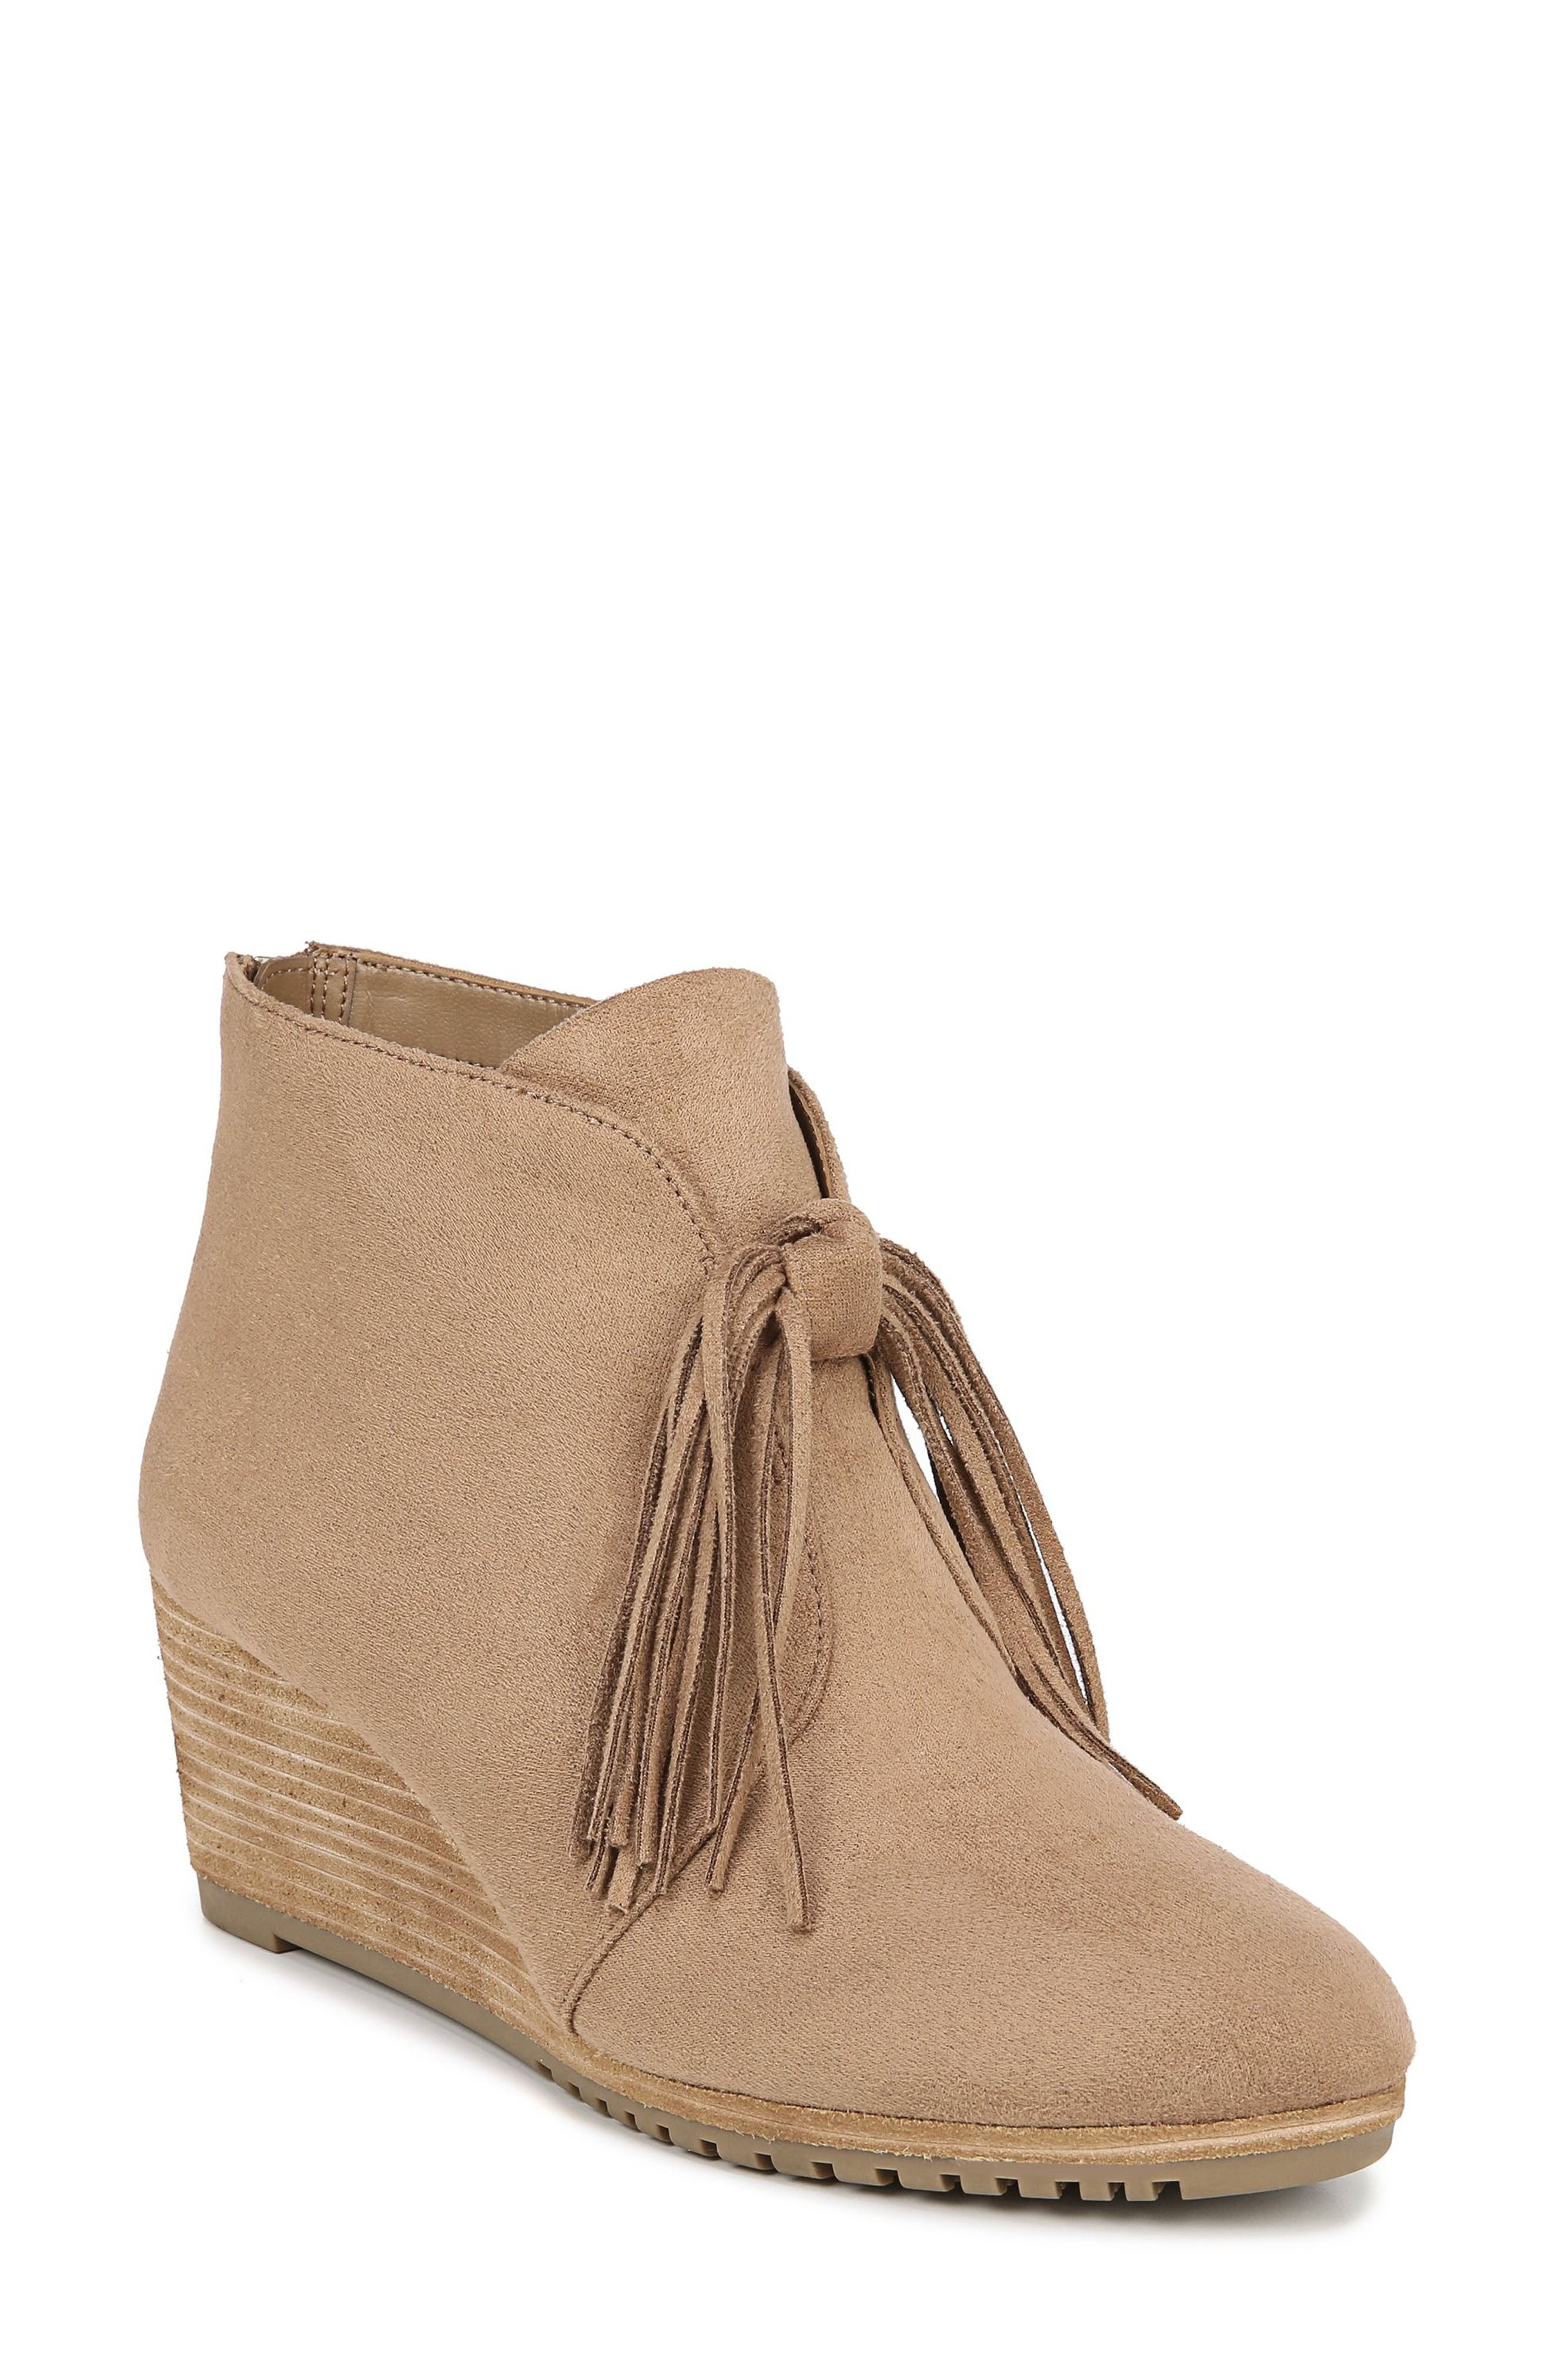 UPC 736703125329 product image for Women's Dr. Scholl'S Classify Tassel Wedge Bootie, Size 9 M - Brown | upcitemdb.com